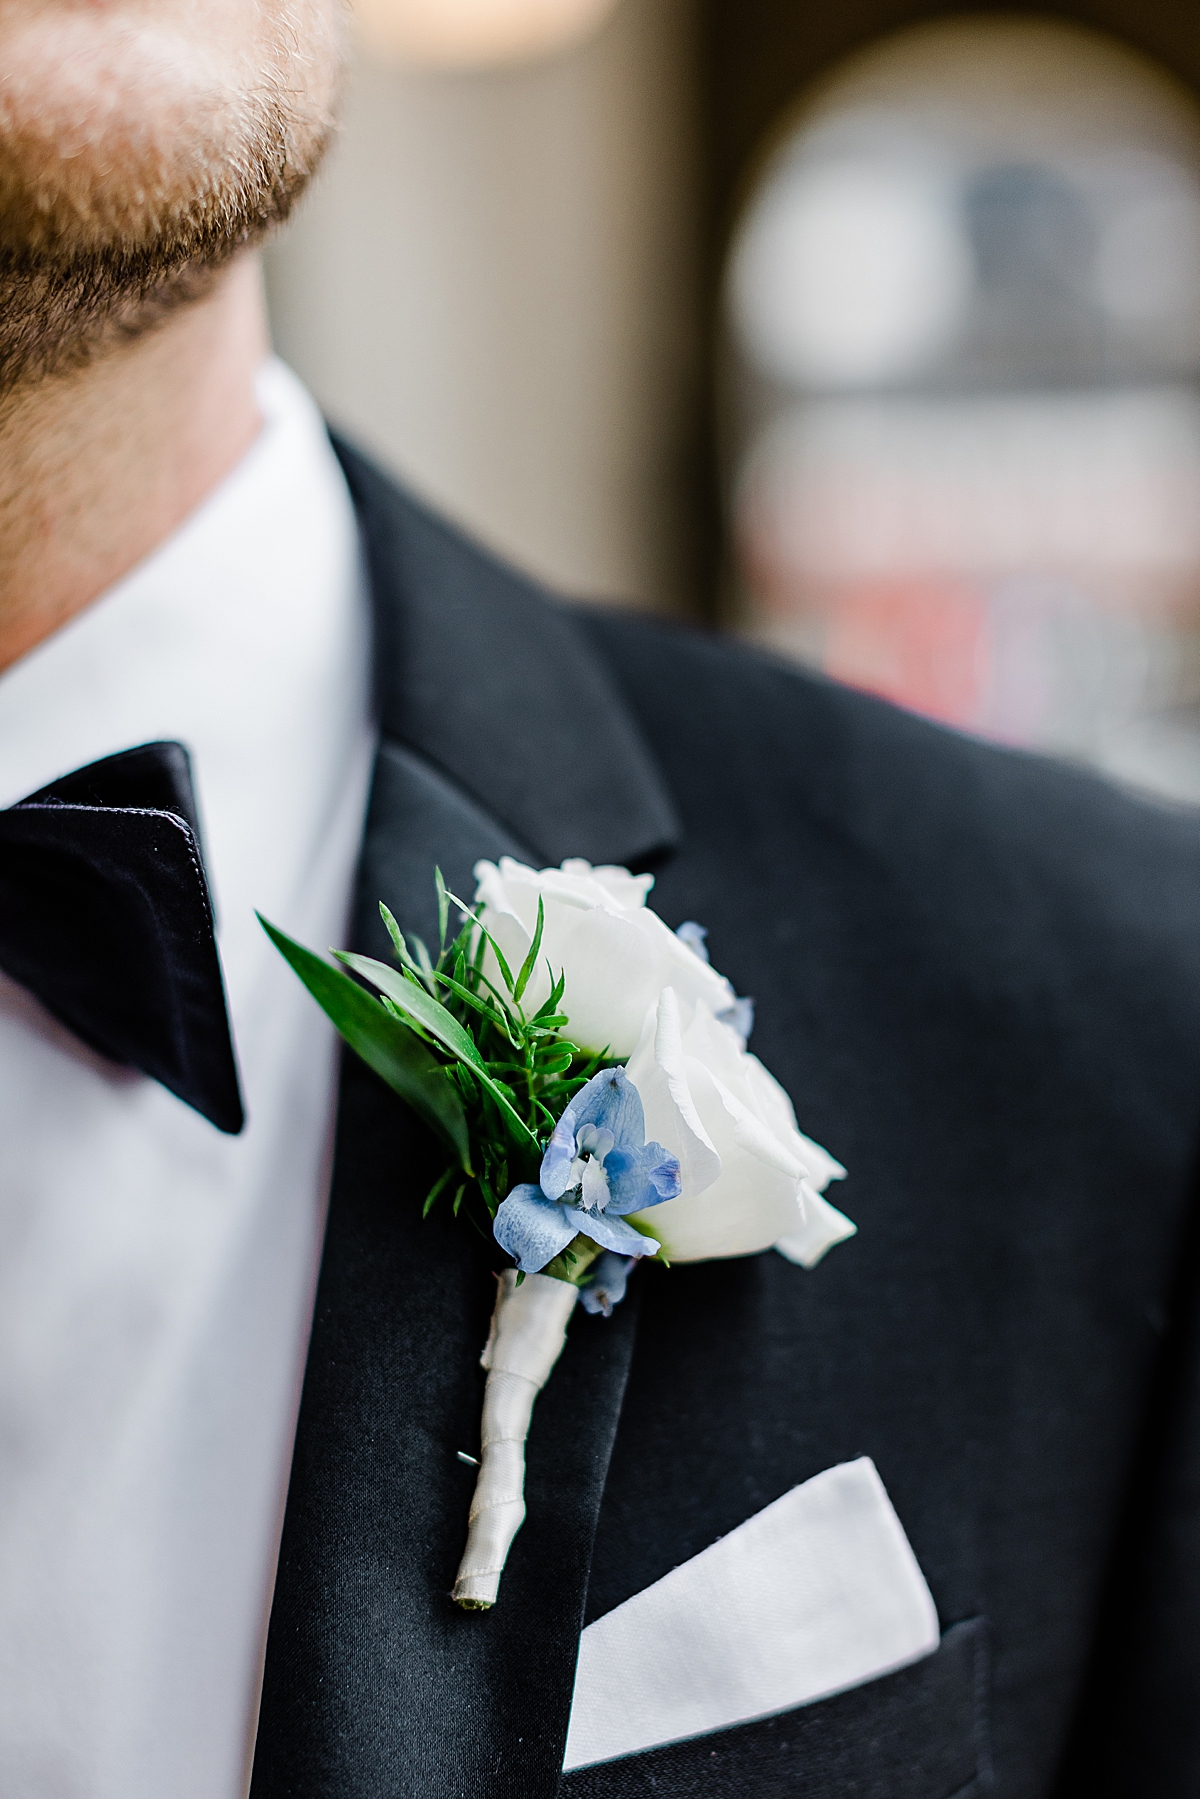 A Classic Chicago Spring Wedding at the Industrial City Hall Events